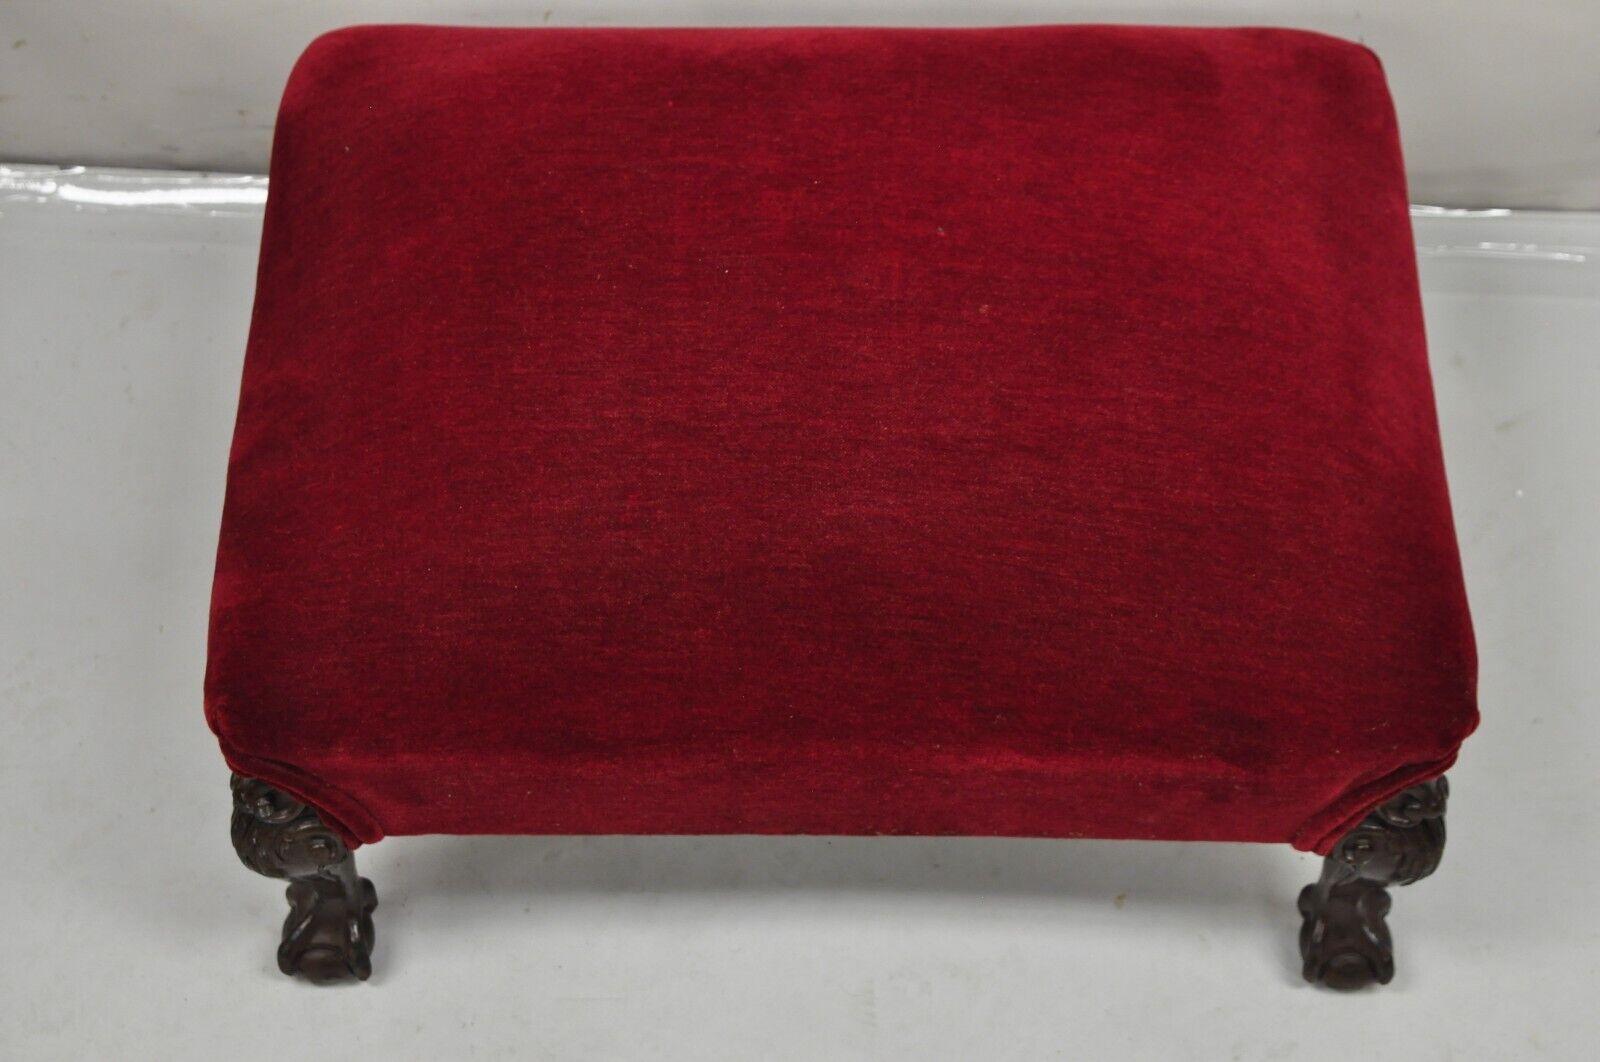 20th Century Antique Chippendale Style Mahogany Ball and Claw Carved Red Footstool Ottoman